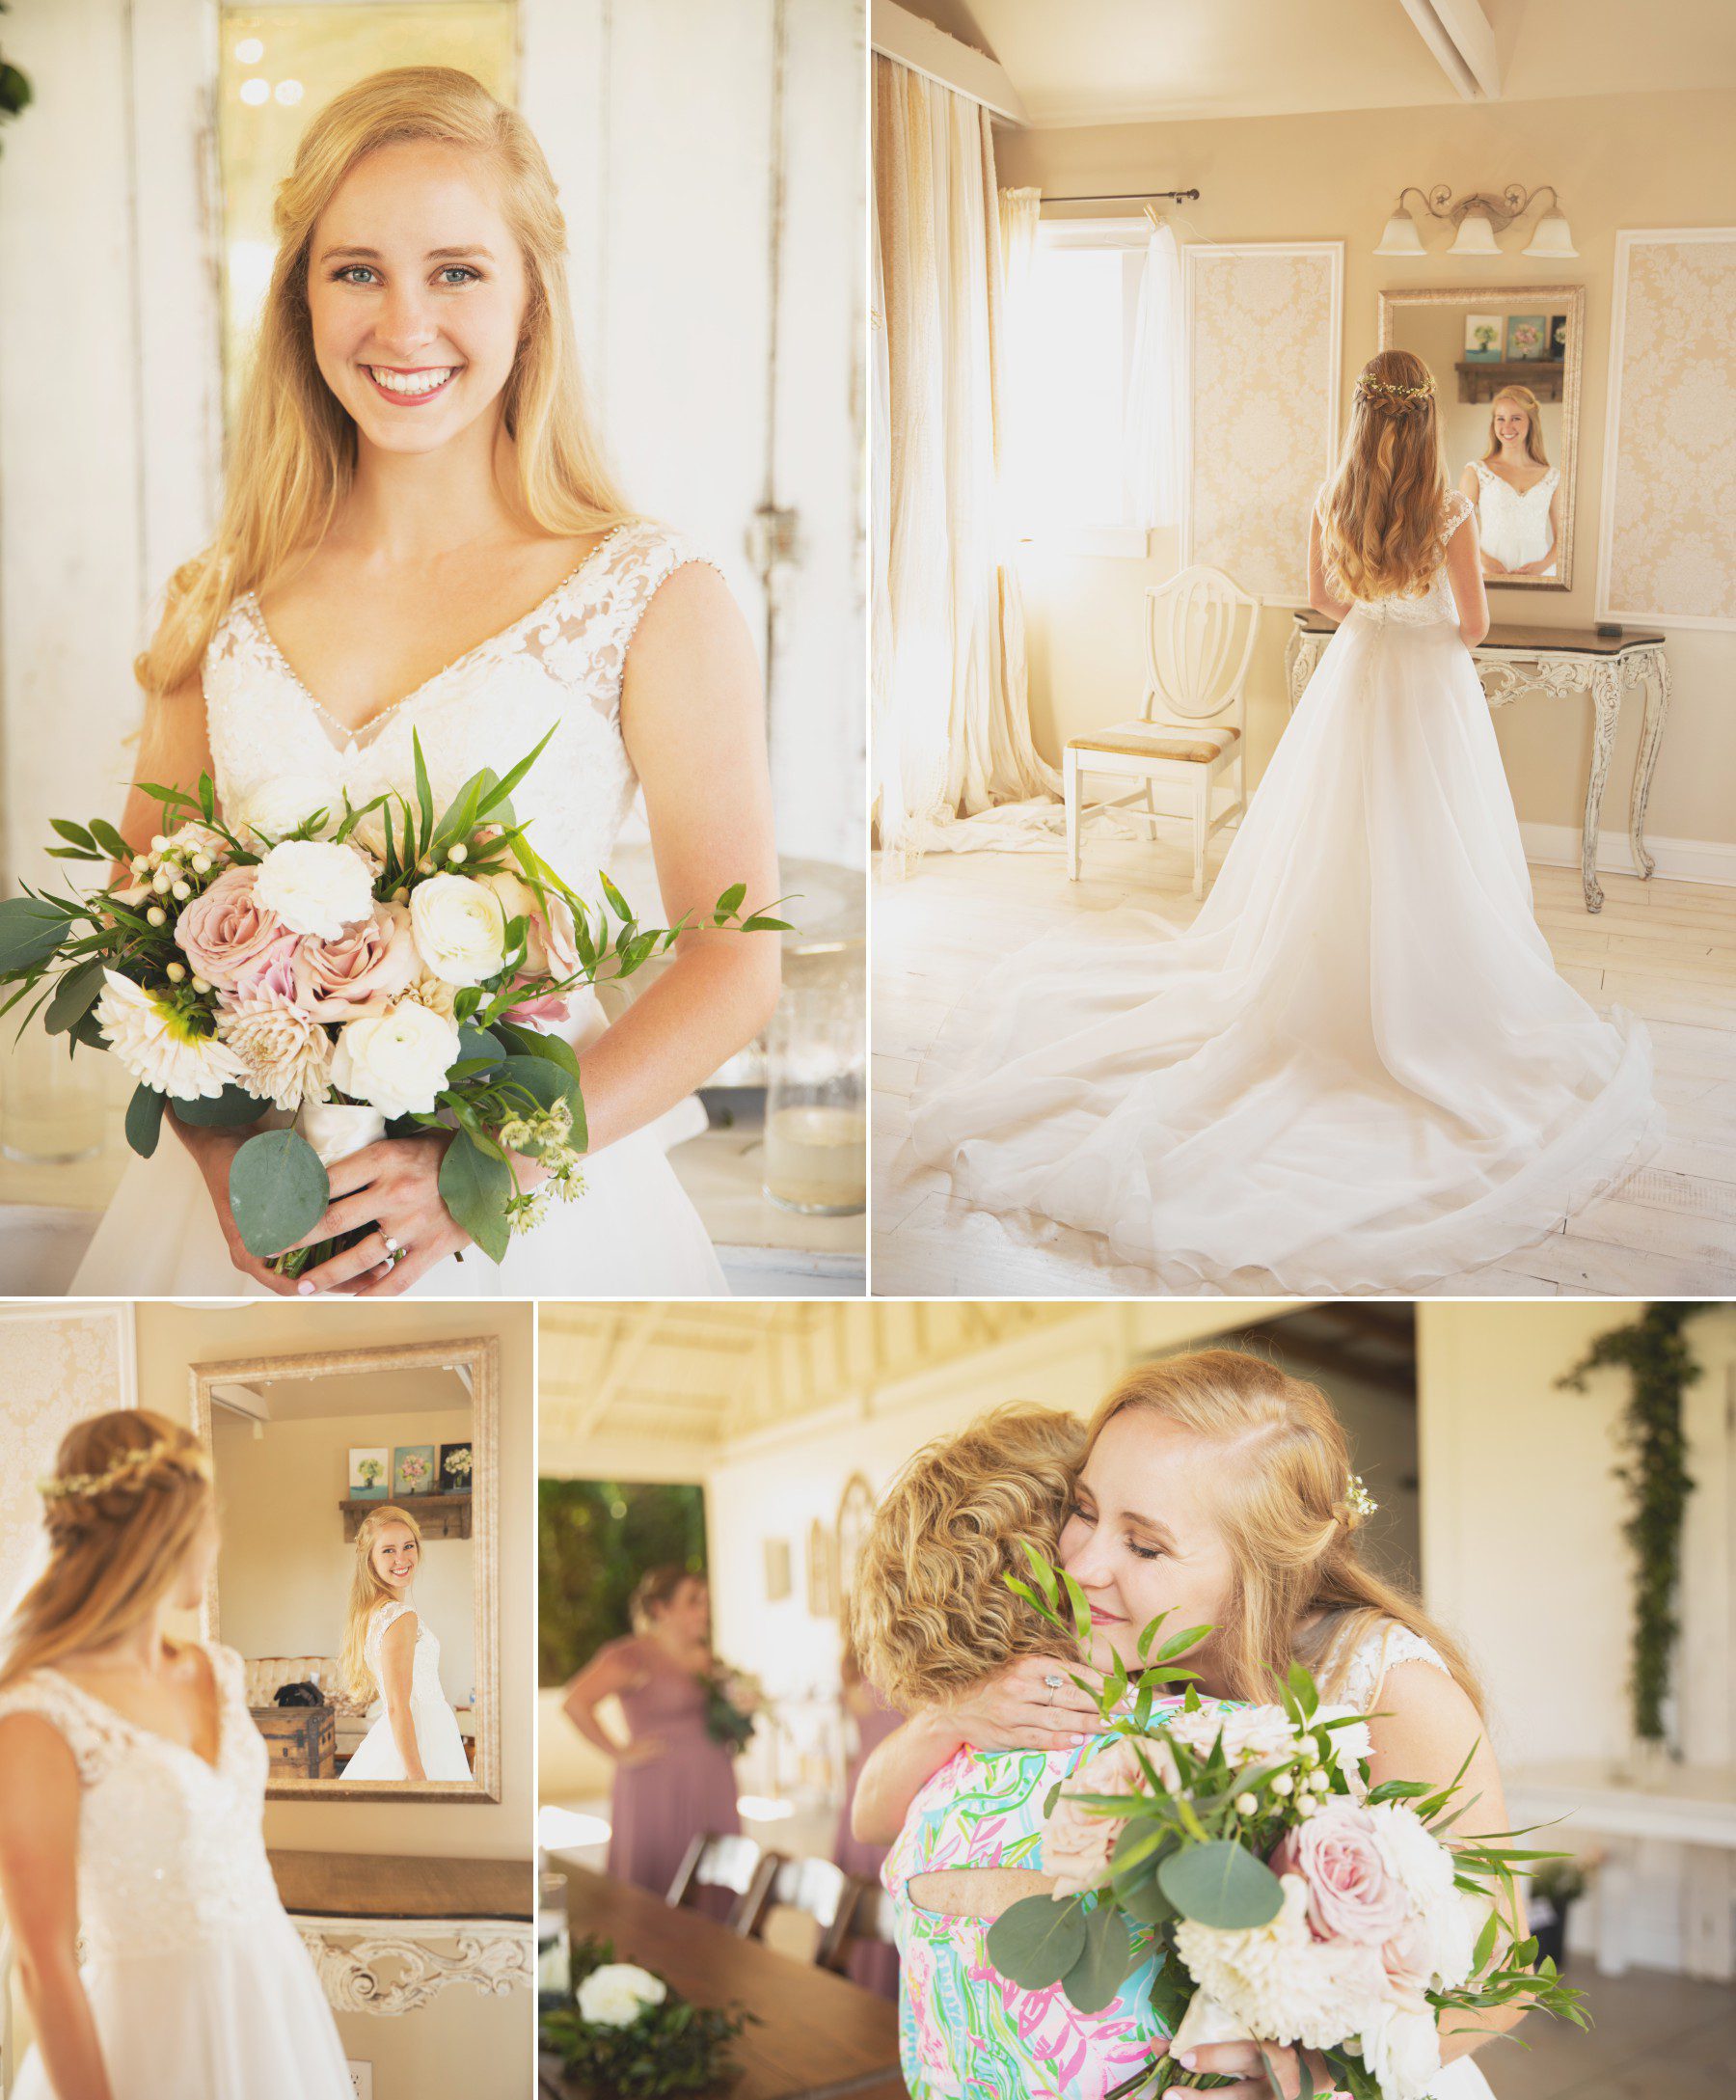 Bride hugs friend and gets ready in Bridal suite